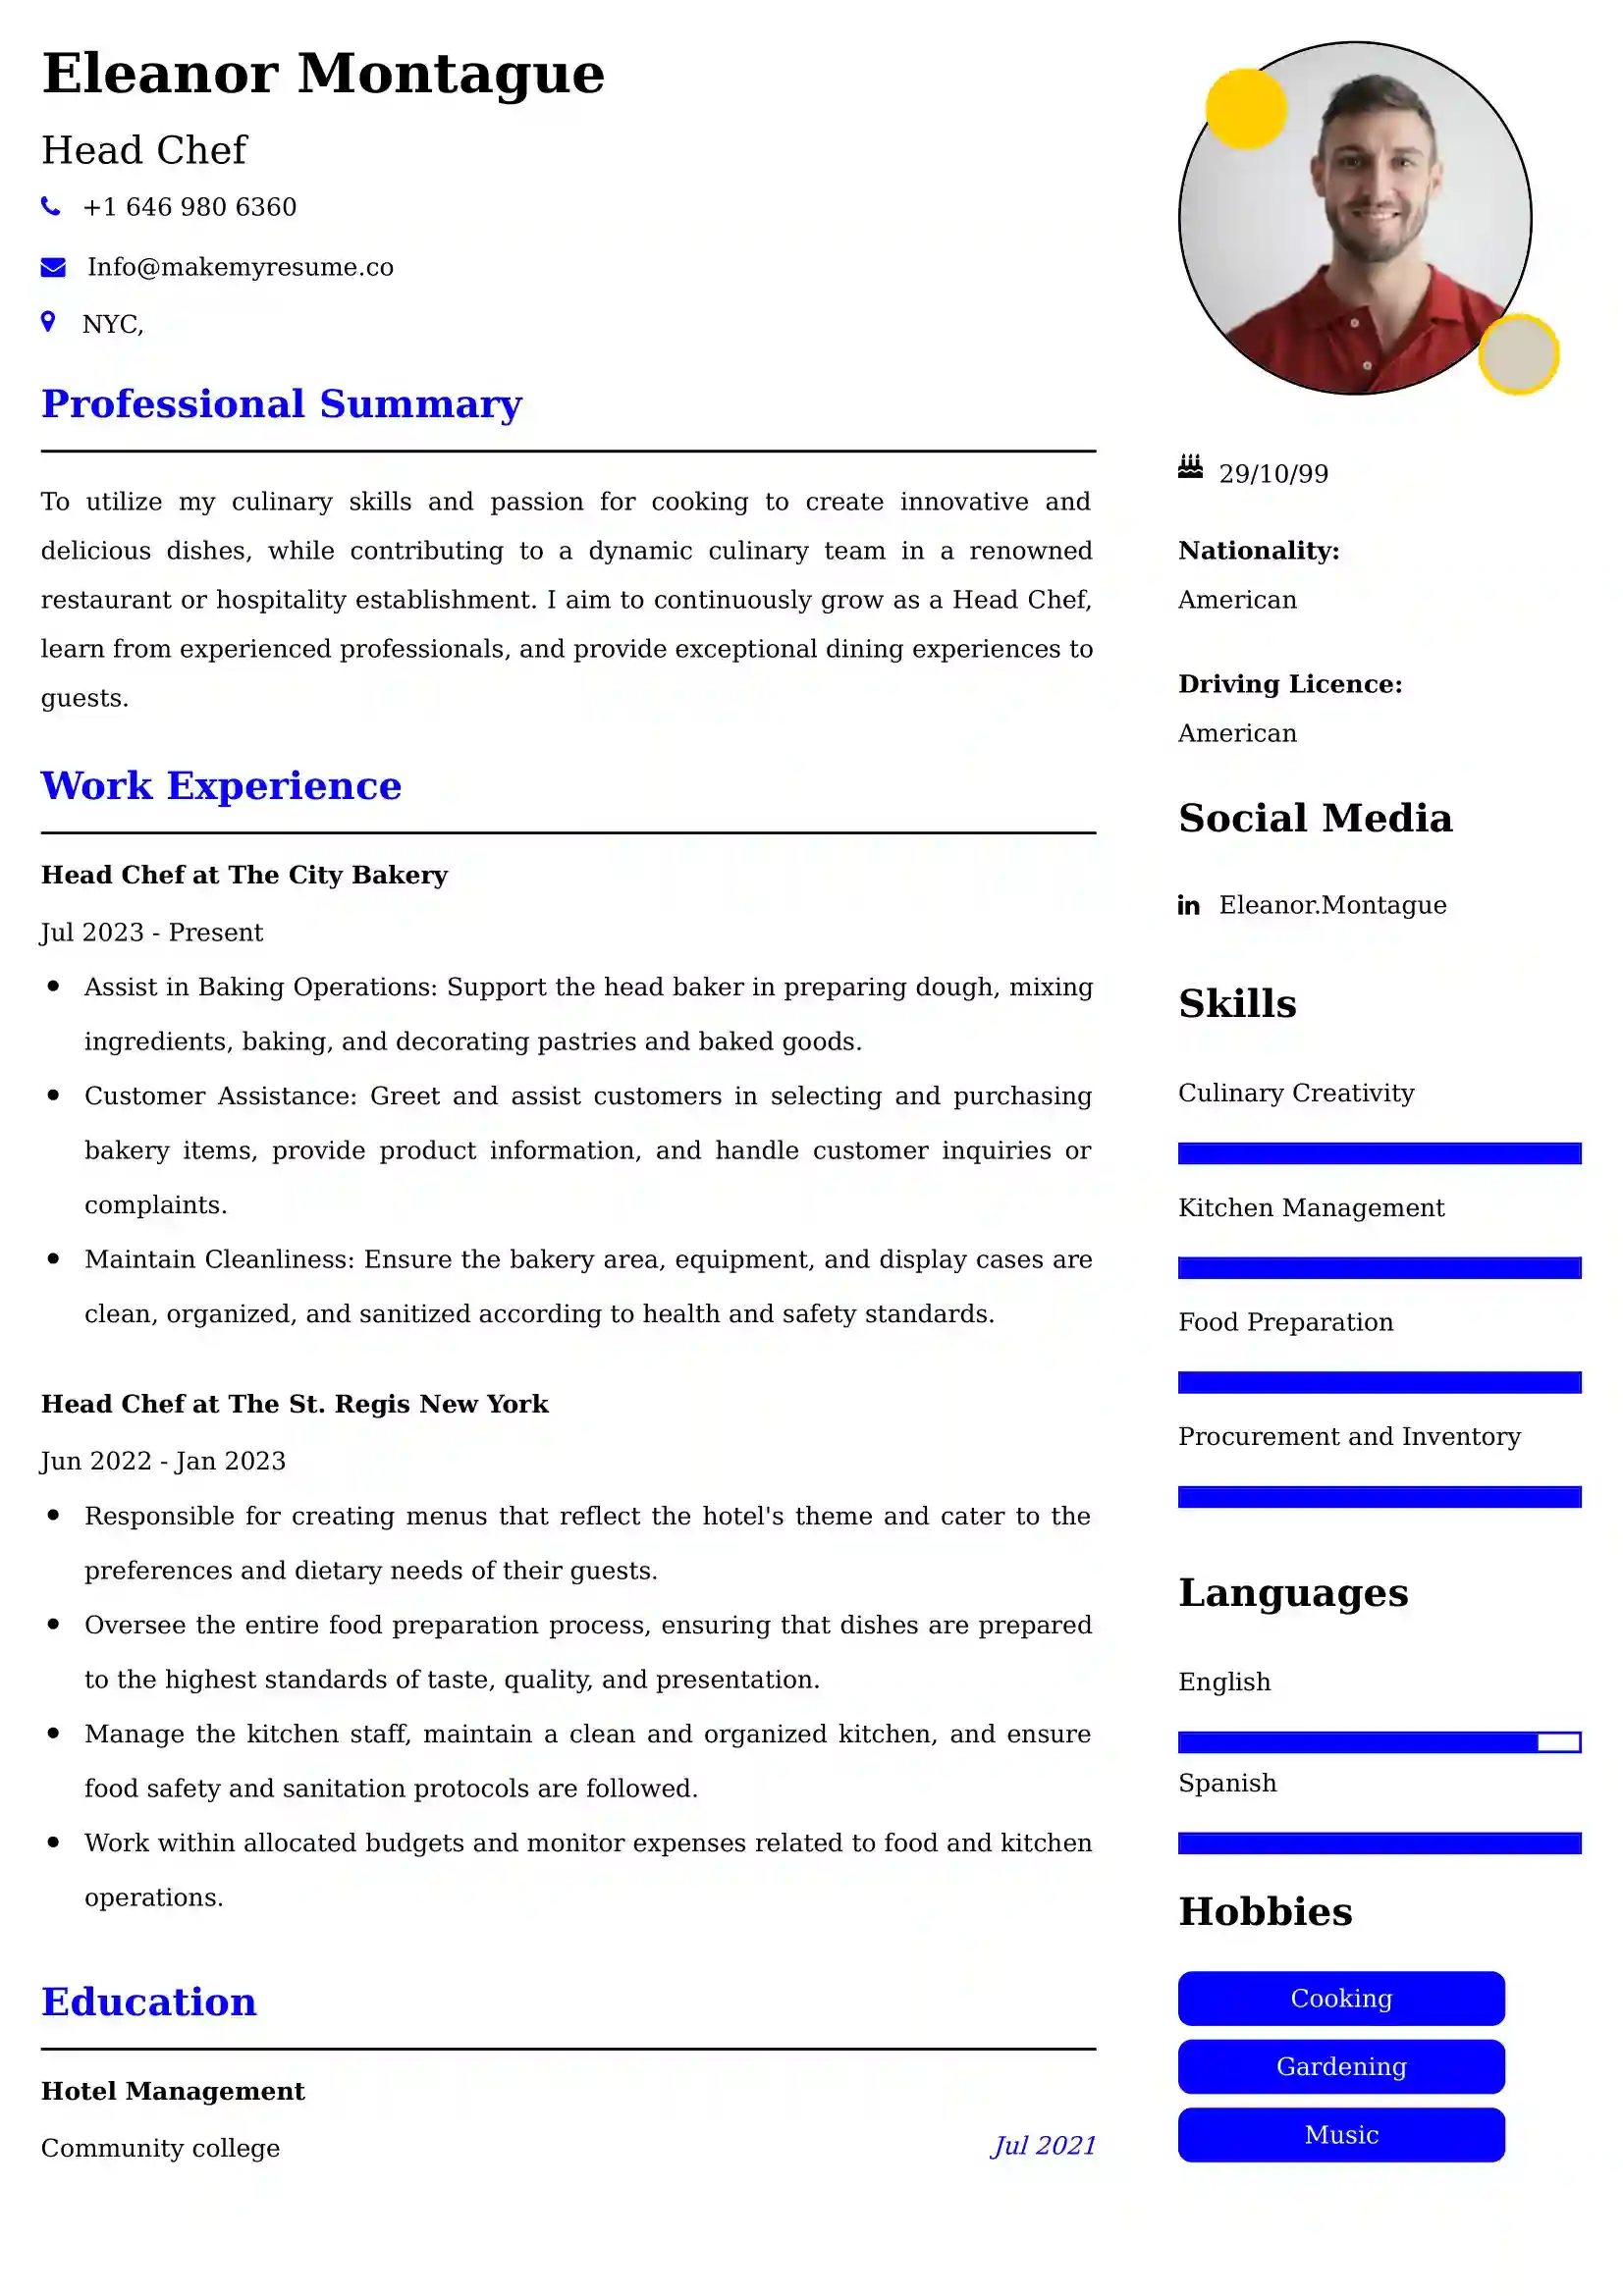 Head Chef Resume Examples - UK Format, Latest Template.